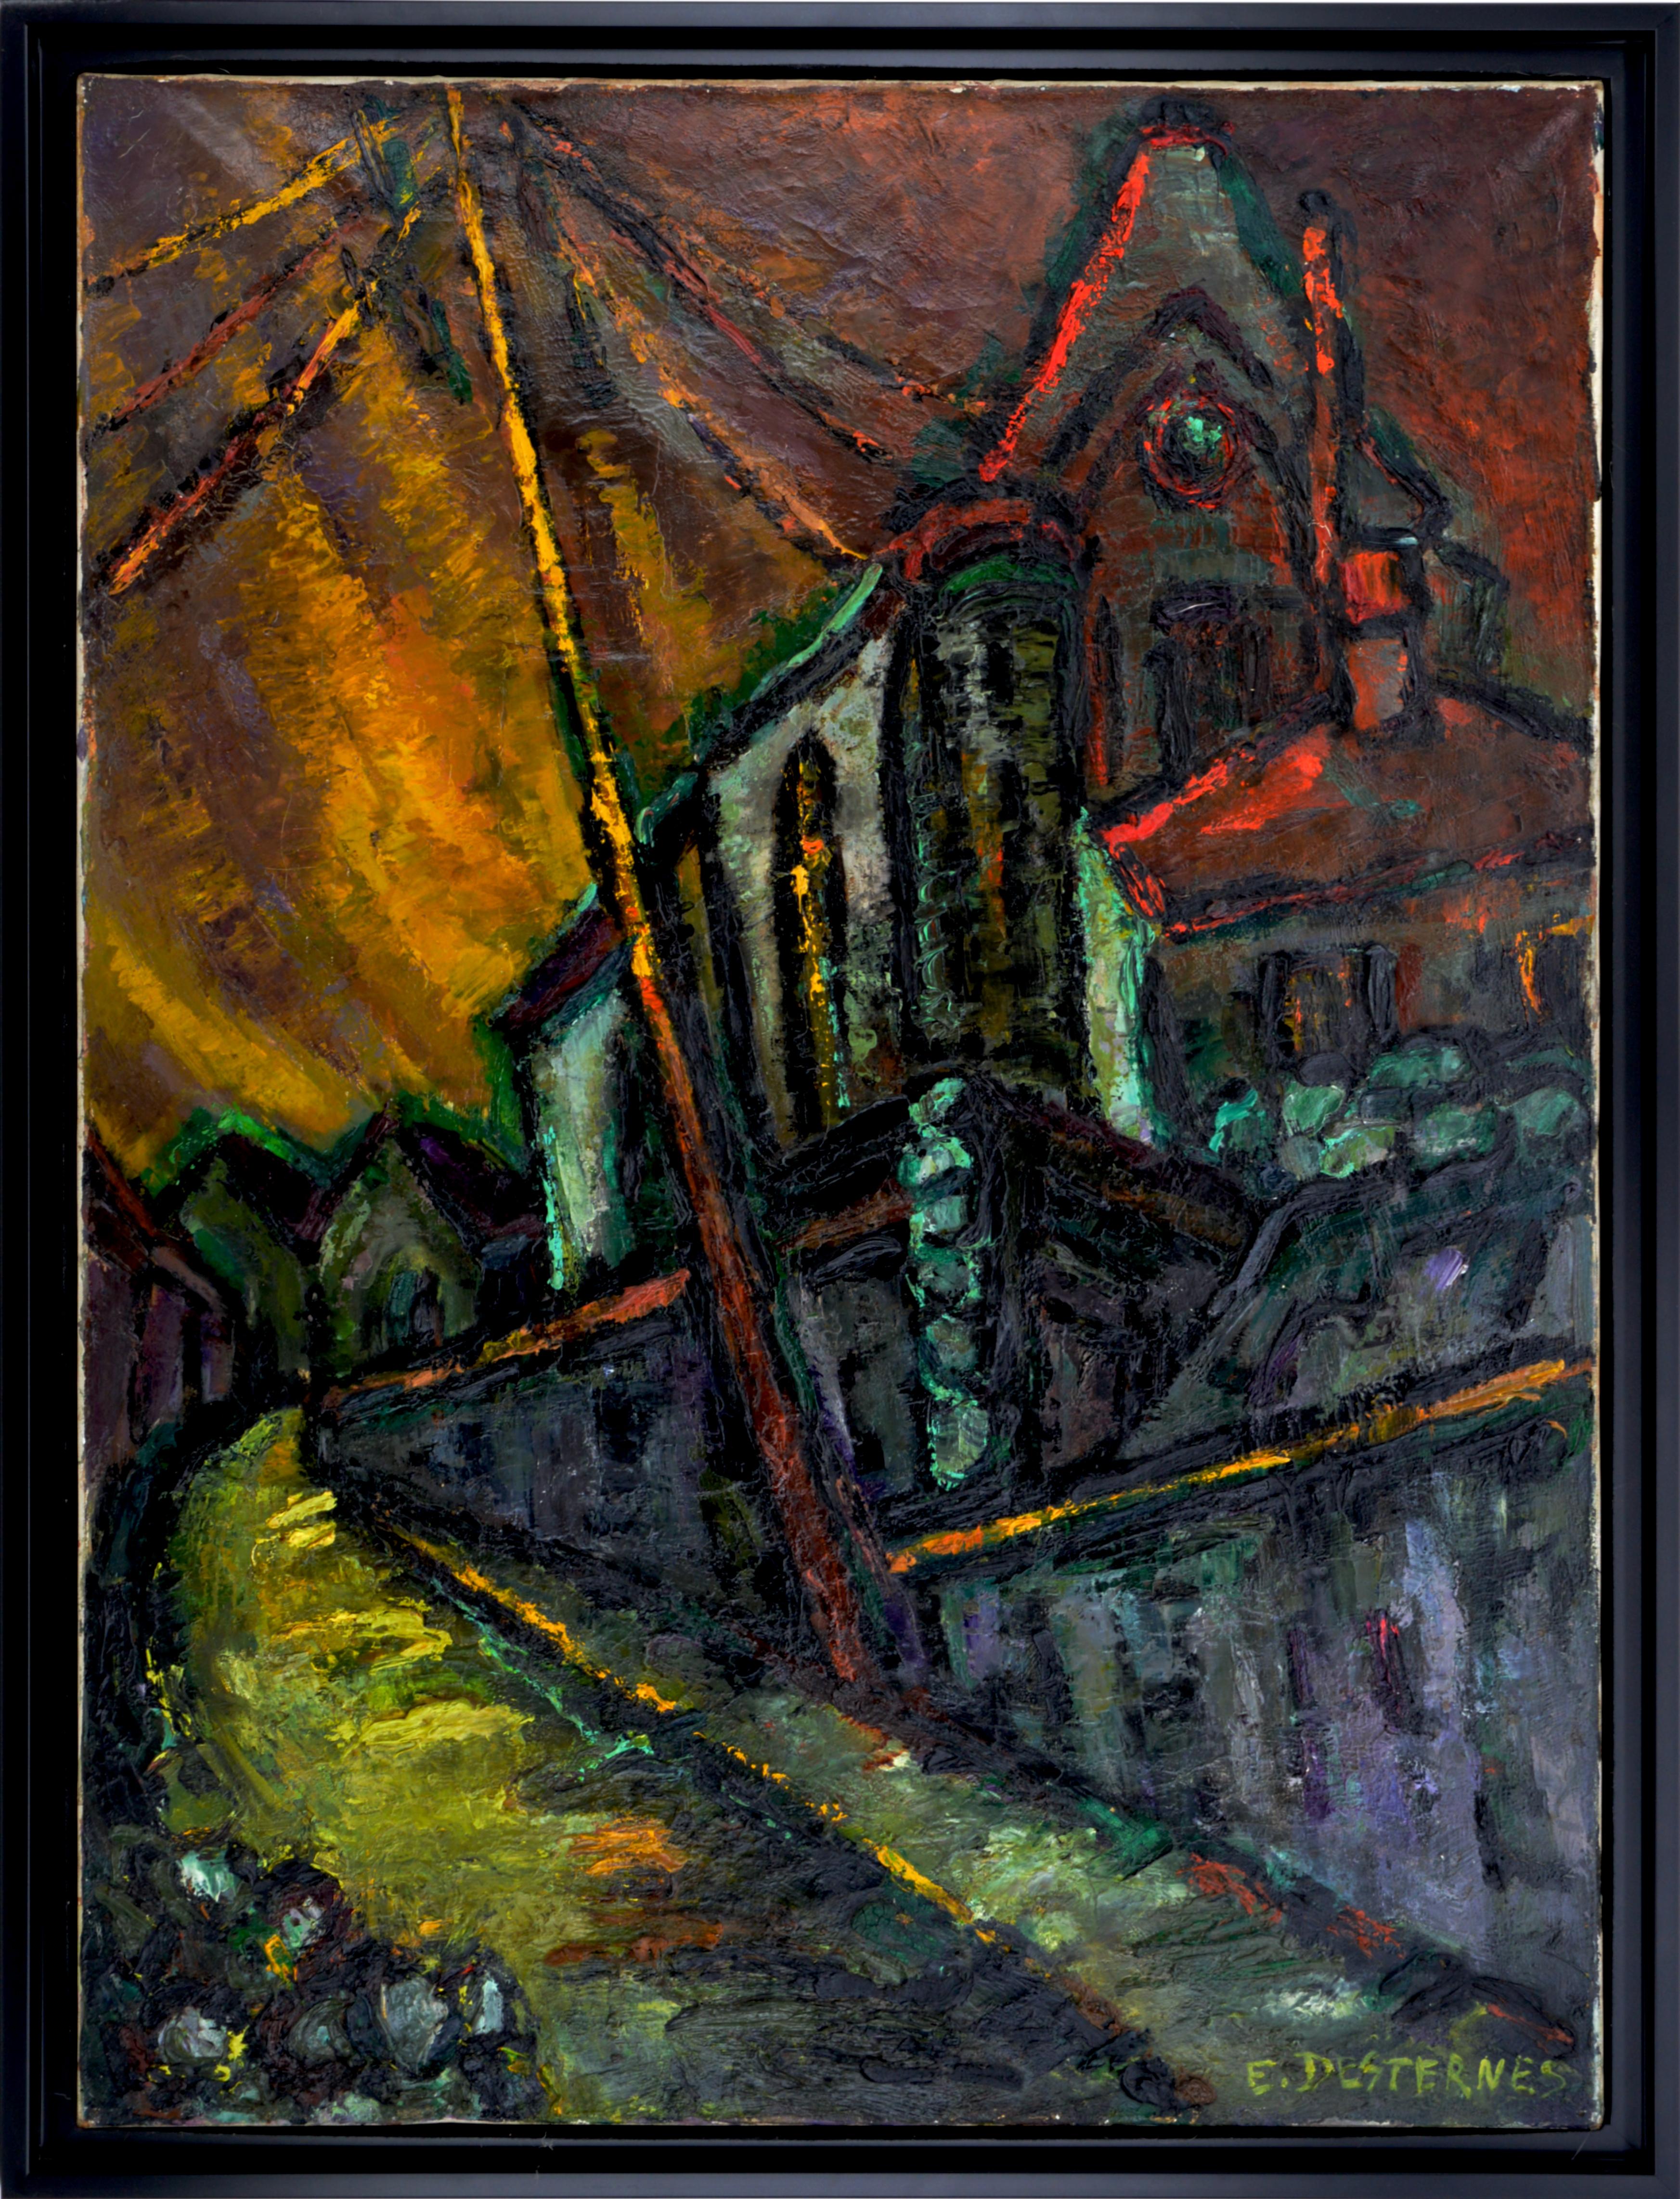 Oil on canvas by Edith Desternes (1901-2000), France, 1920s. The Church Notre-Dame de l'Assomption in Auvers-sur-Oise. This church has been painted in 1890 by Vincent van Gogh. At first glance, one is struck by the strength of this work. Then, on